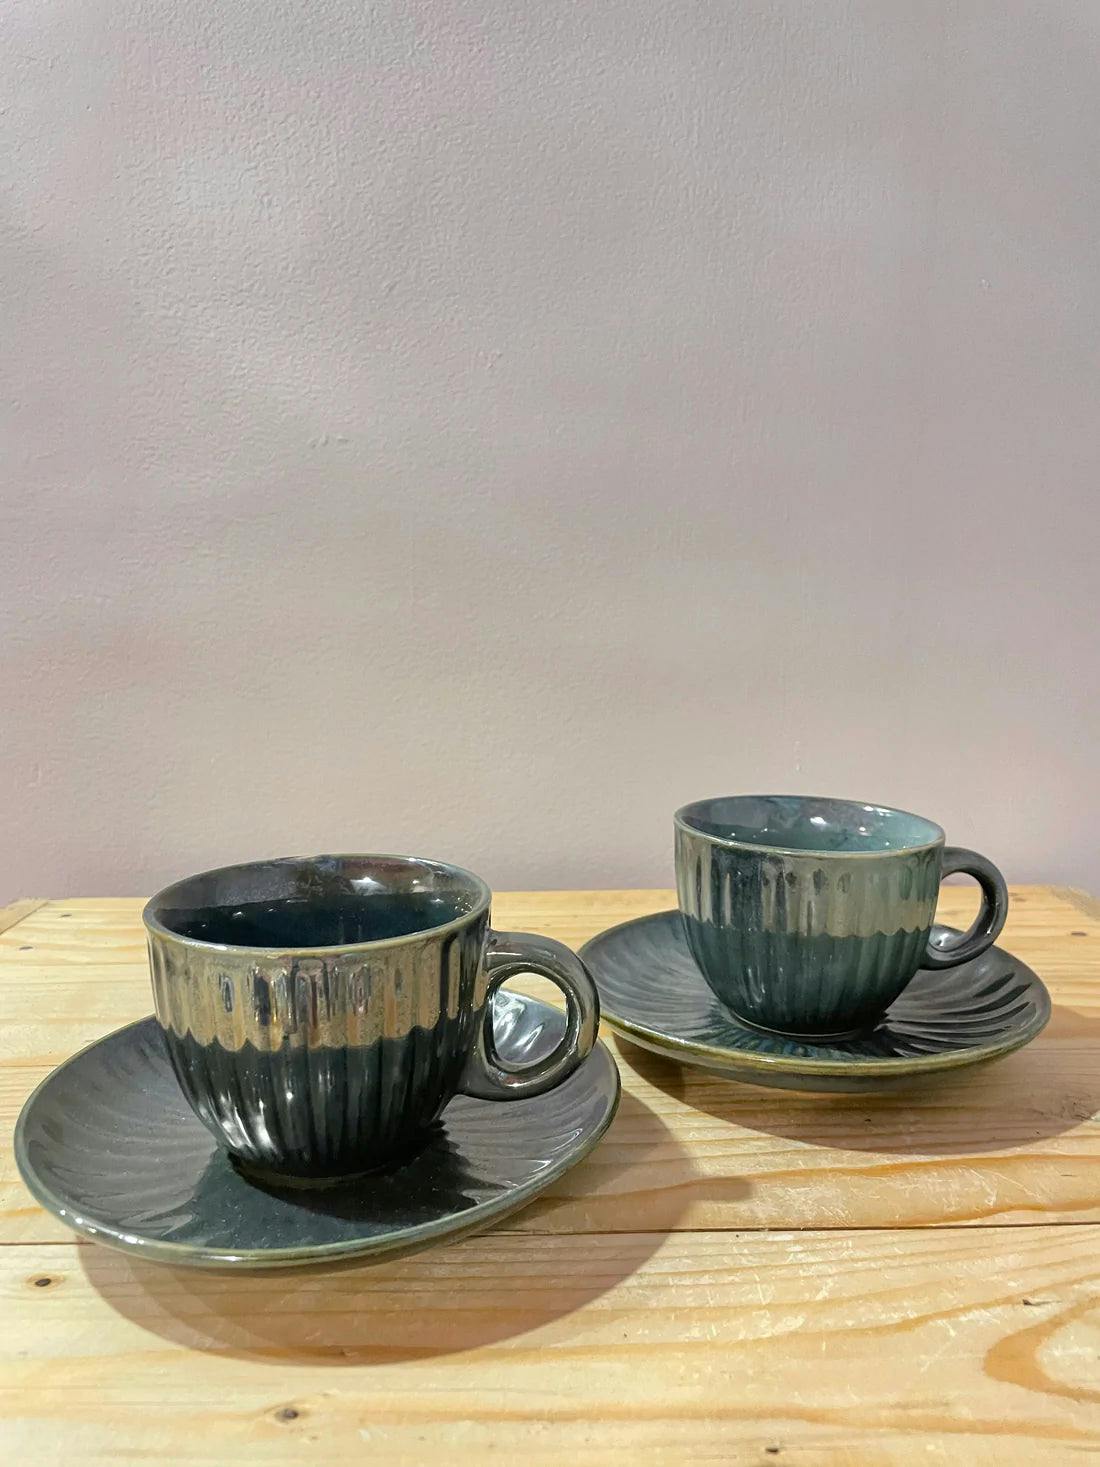 Mehroon Cup & Saucer, a product by Hello December